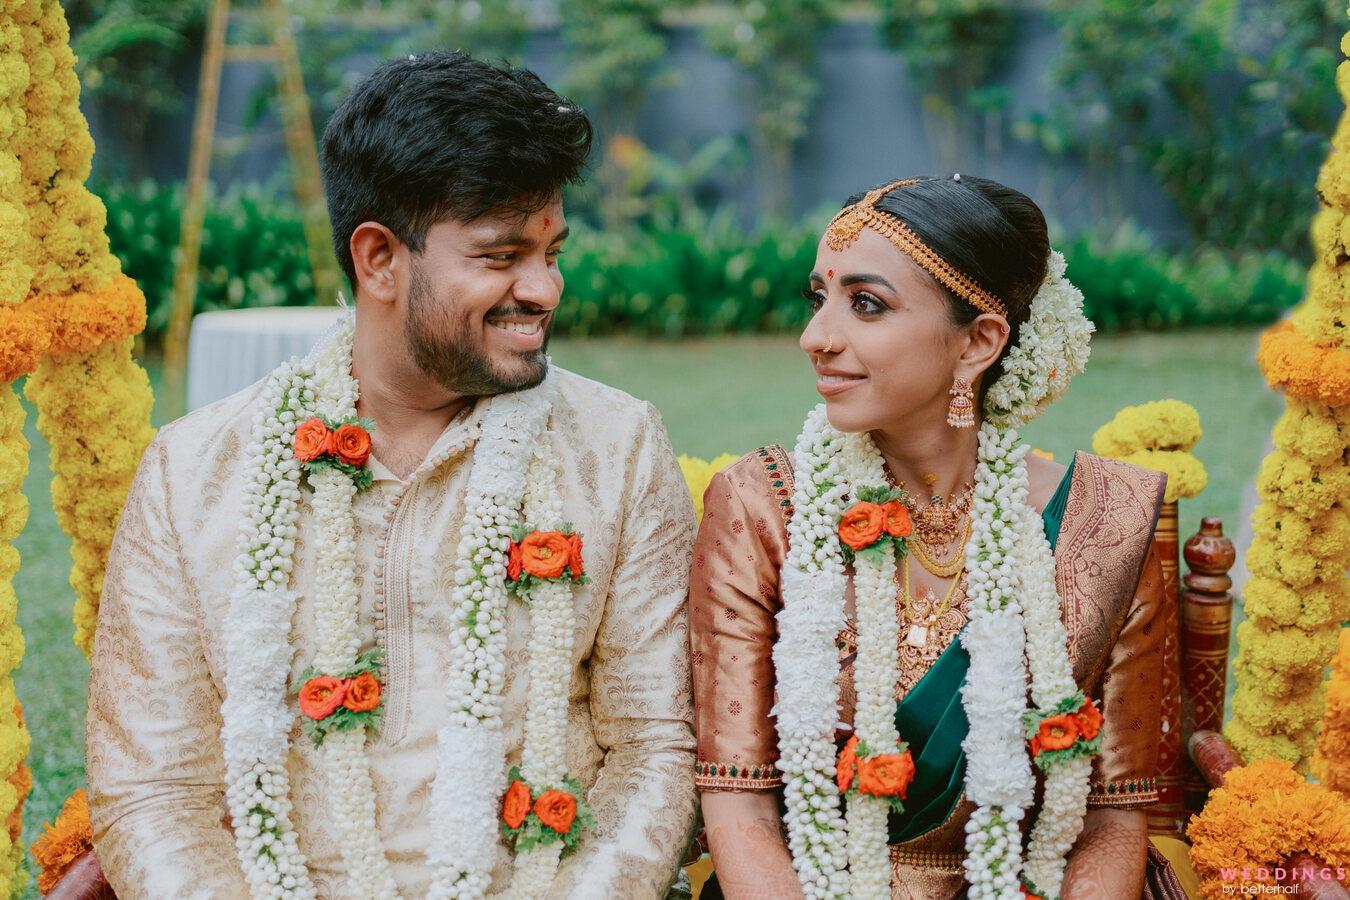 Dreamy pictures from actress Nisha BK's wedding | Times of India